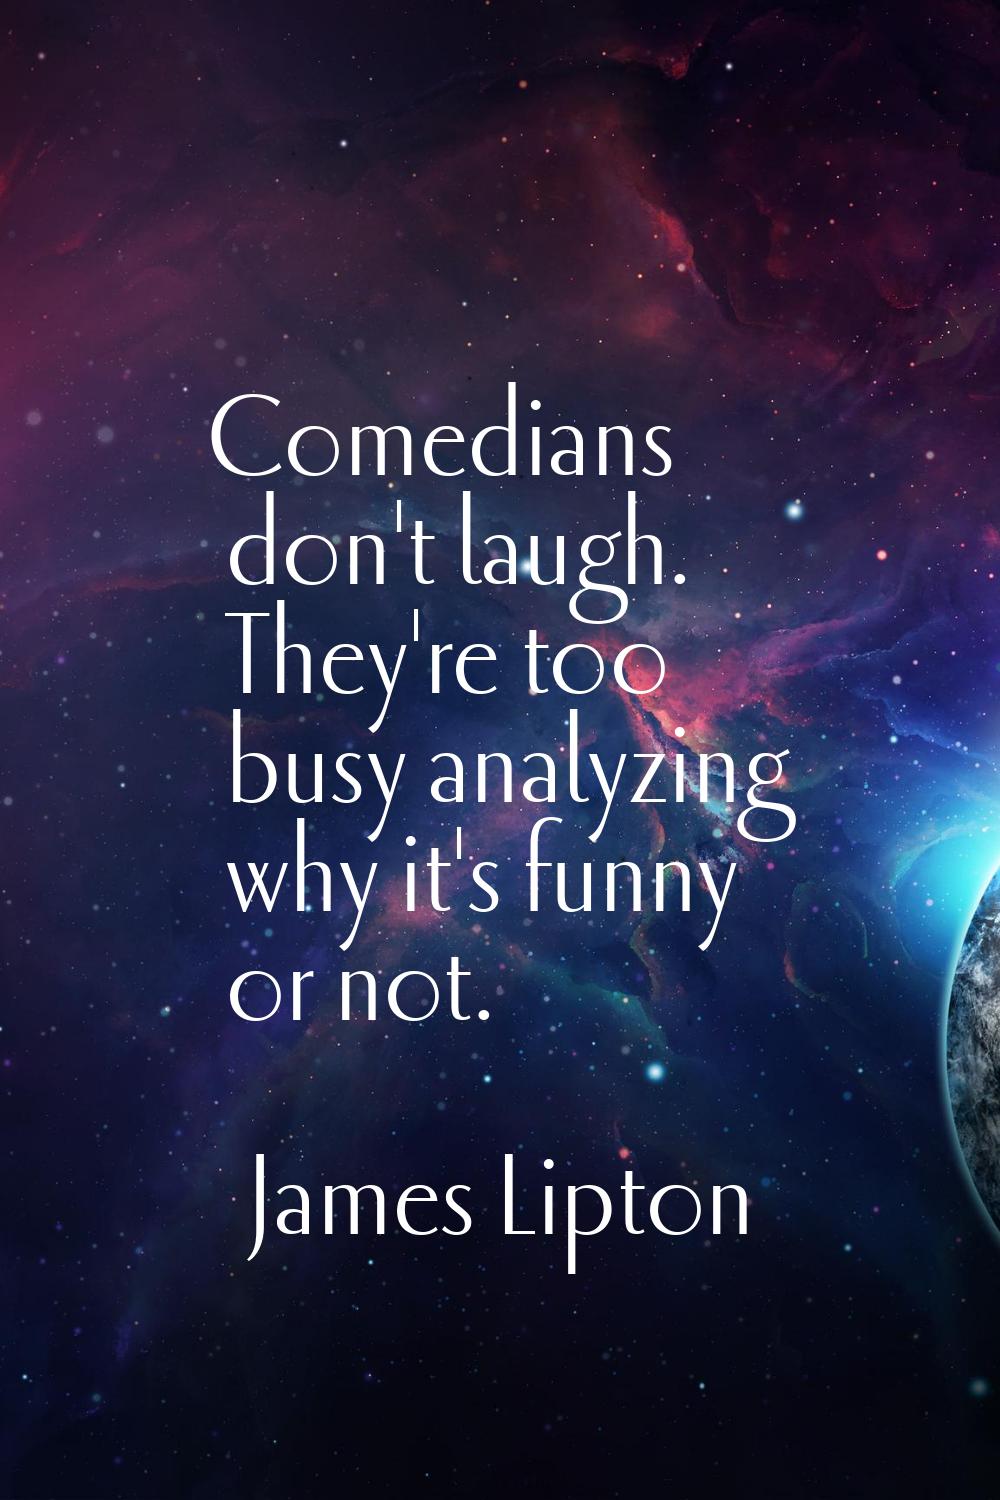 Comedians don't laugh. They're too busy analyzing why it's funny or not.